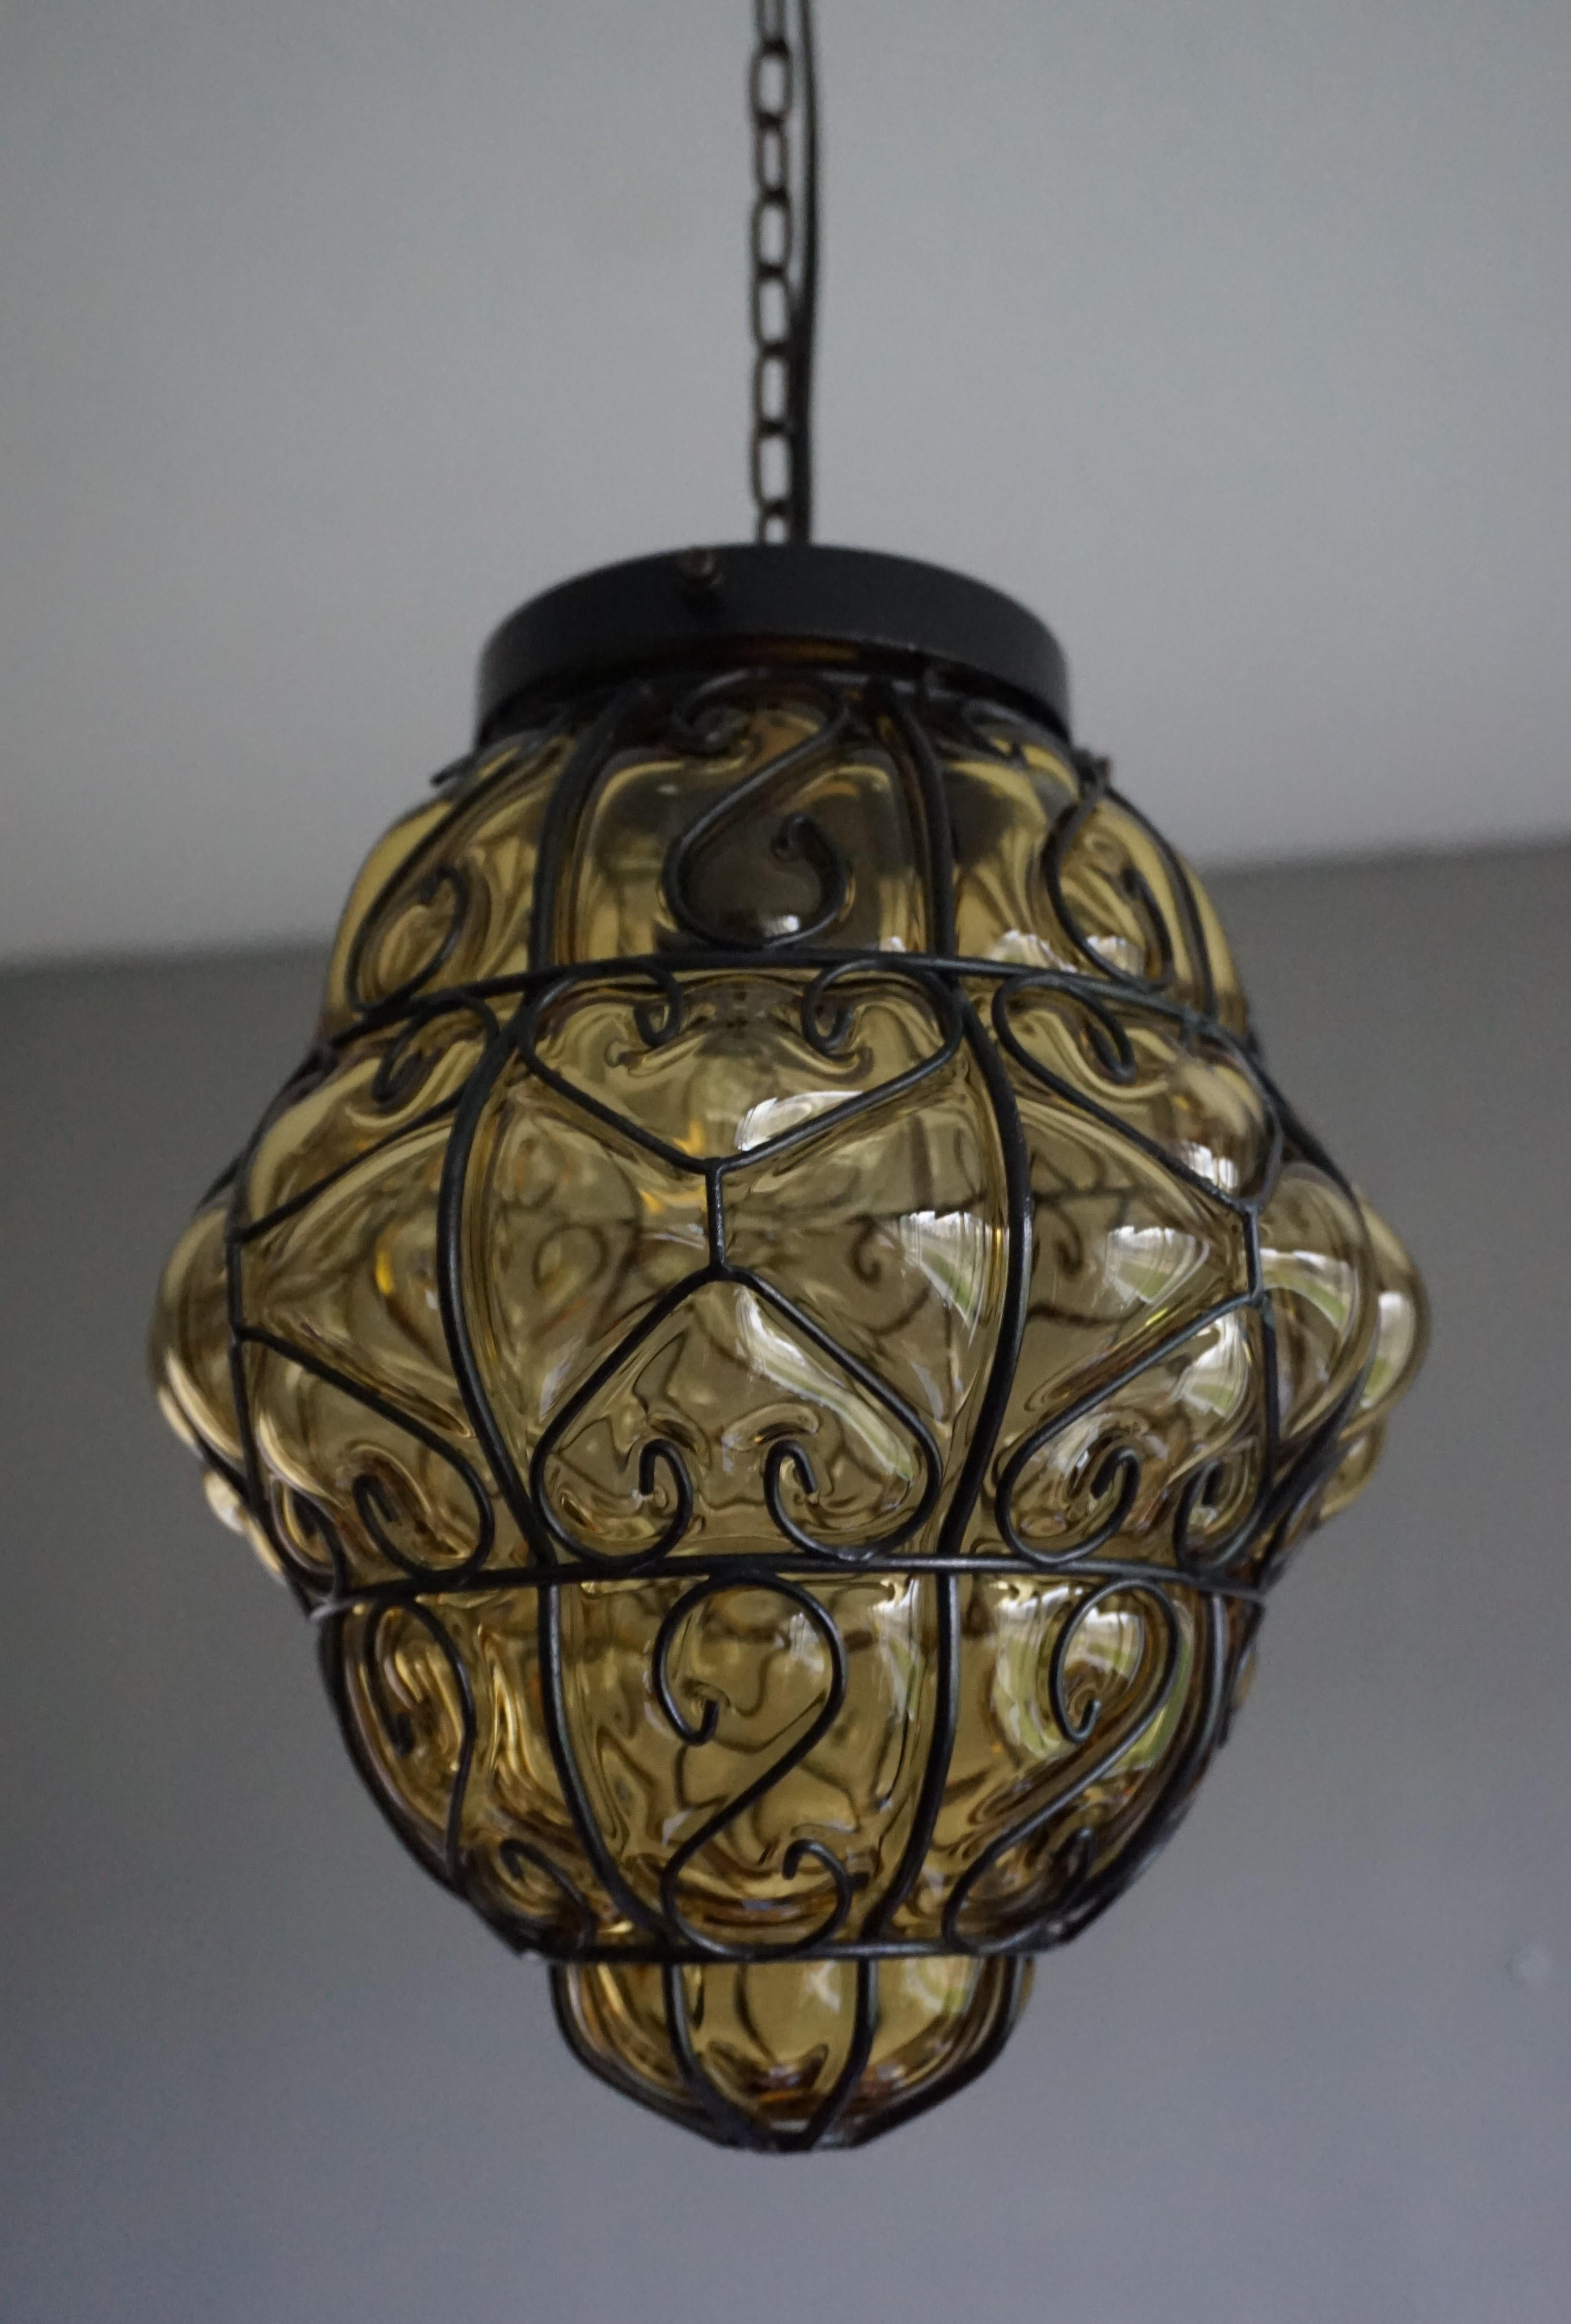 Midcentury Mouth Blown Amber Glass in Wrought Iron Frame Pendant Light Fixture 1